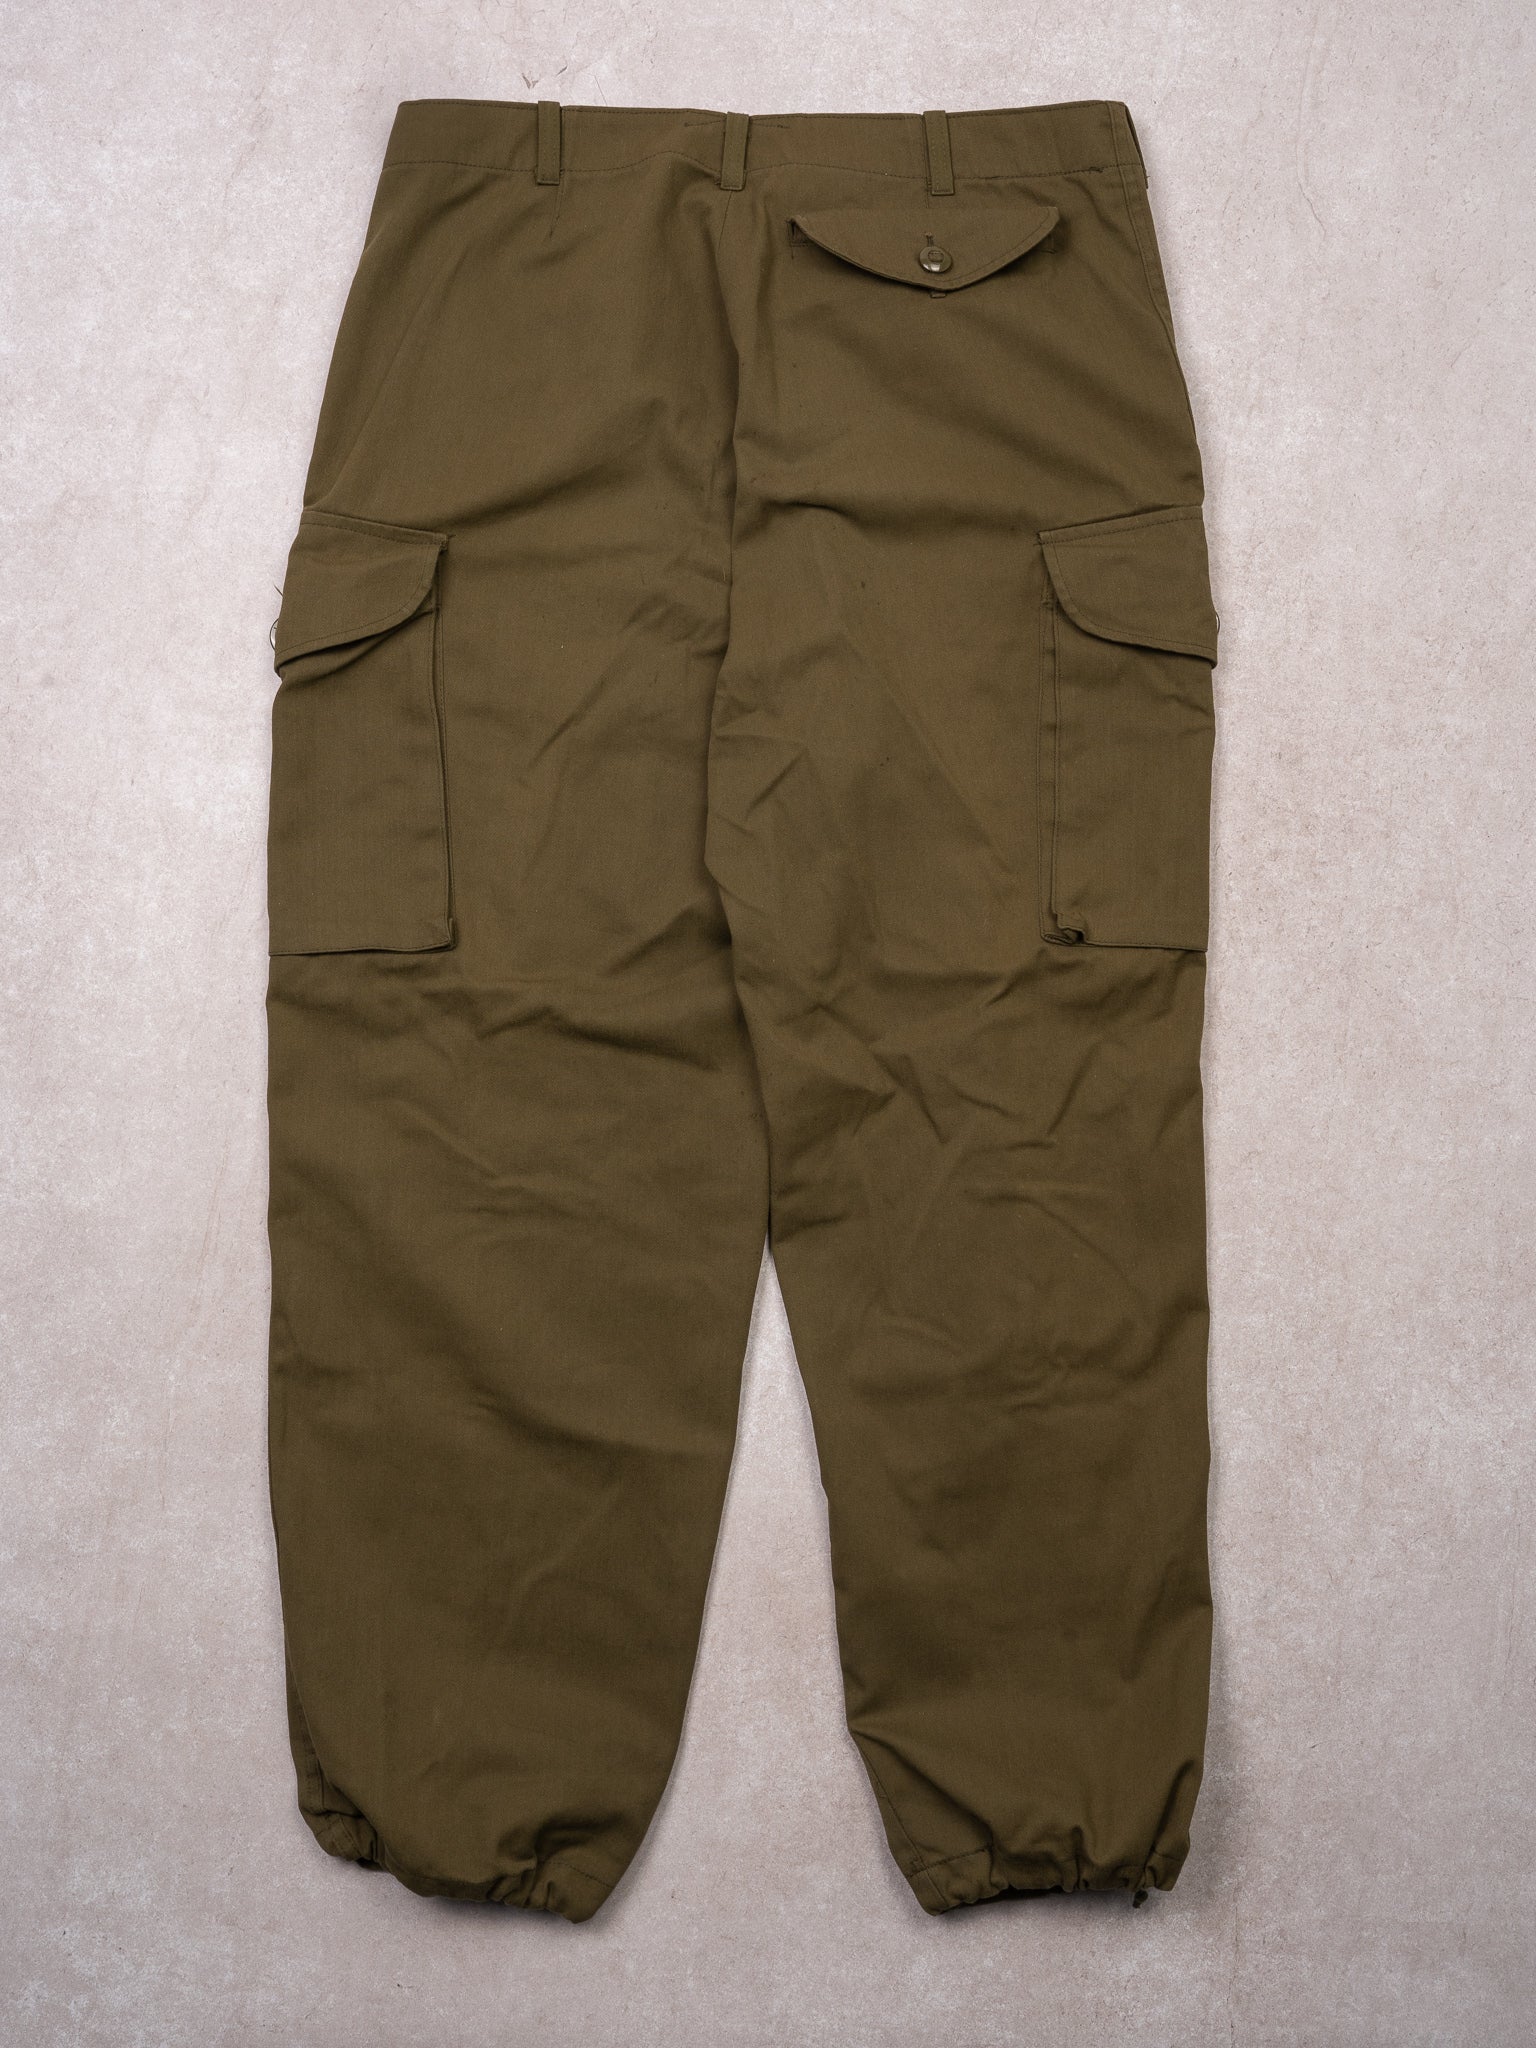 Vintage Green Army Outer Shell Combat Pants (36 x 30)